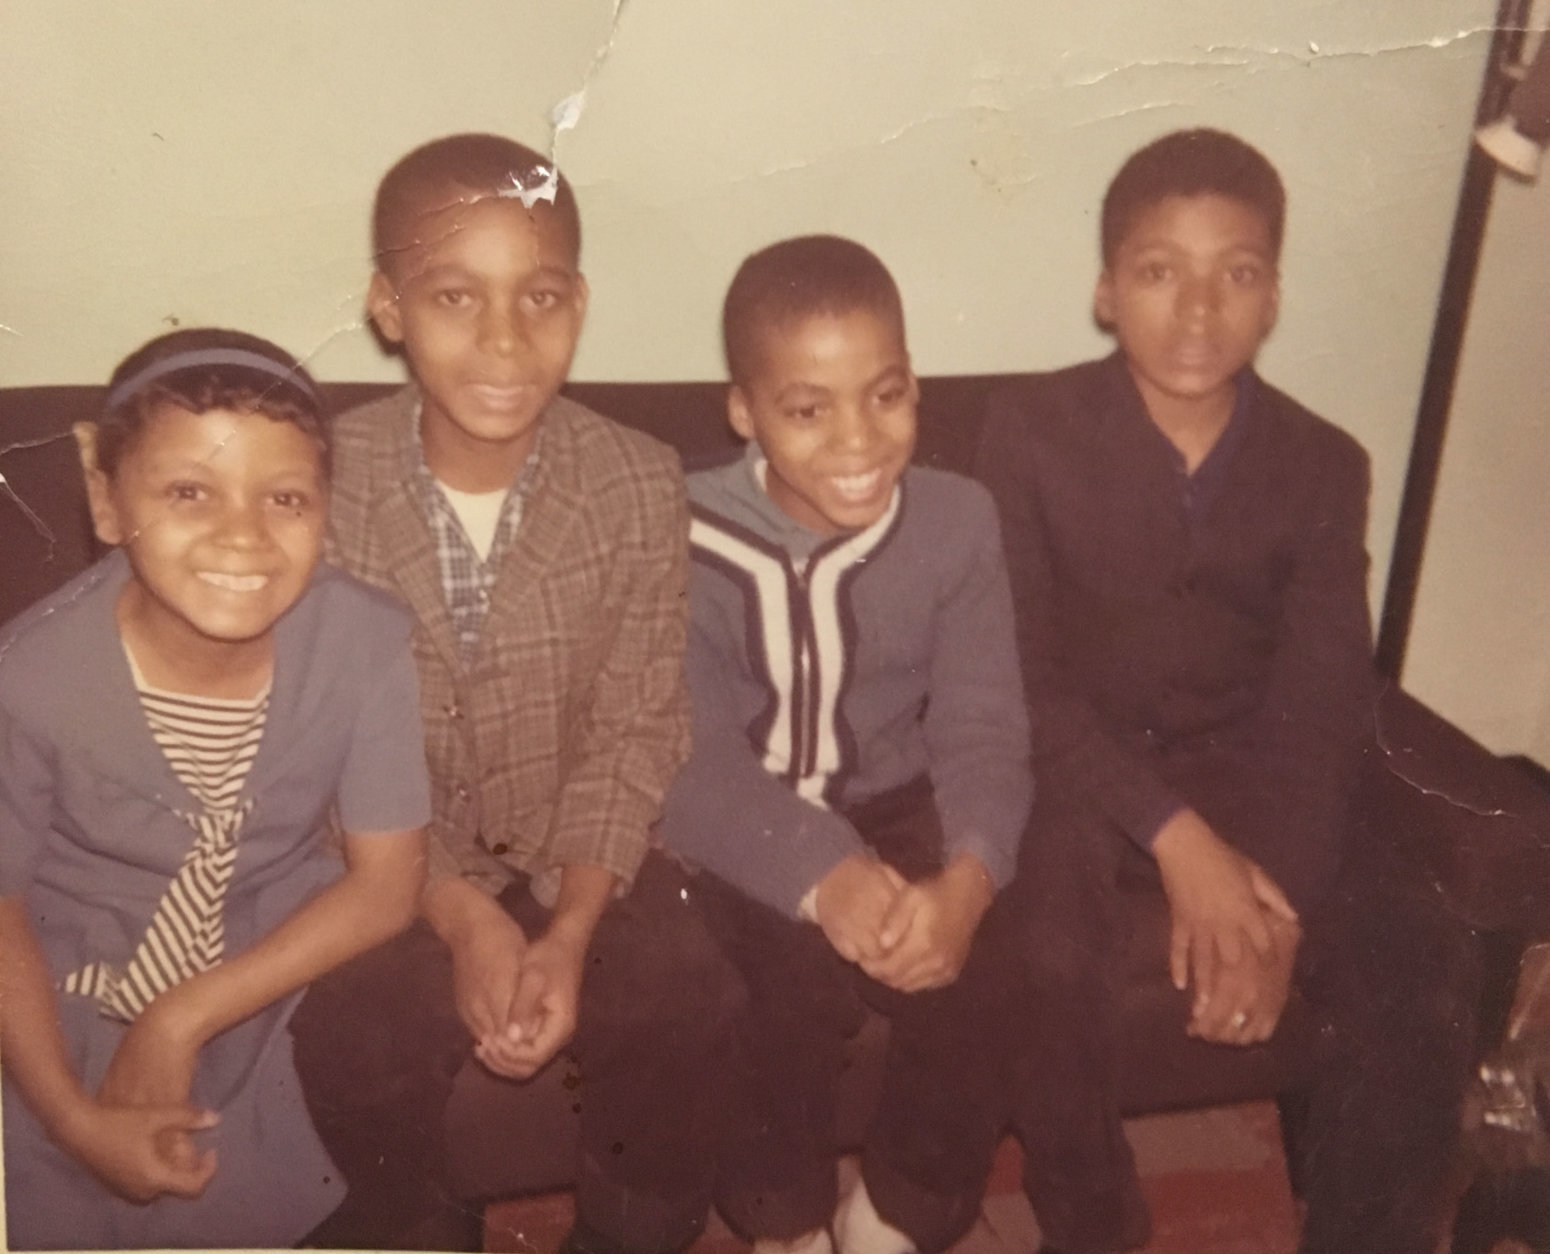 The Lawson children a few years before Vincent's disappearece amid the unrest during the 1968 riots. Vanessa and Vincent (middle) were "like two peas in a pod," Vanessa Lawson Dixon recalls. (Courtesy Vanessa Lawson Dixon)